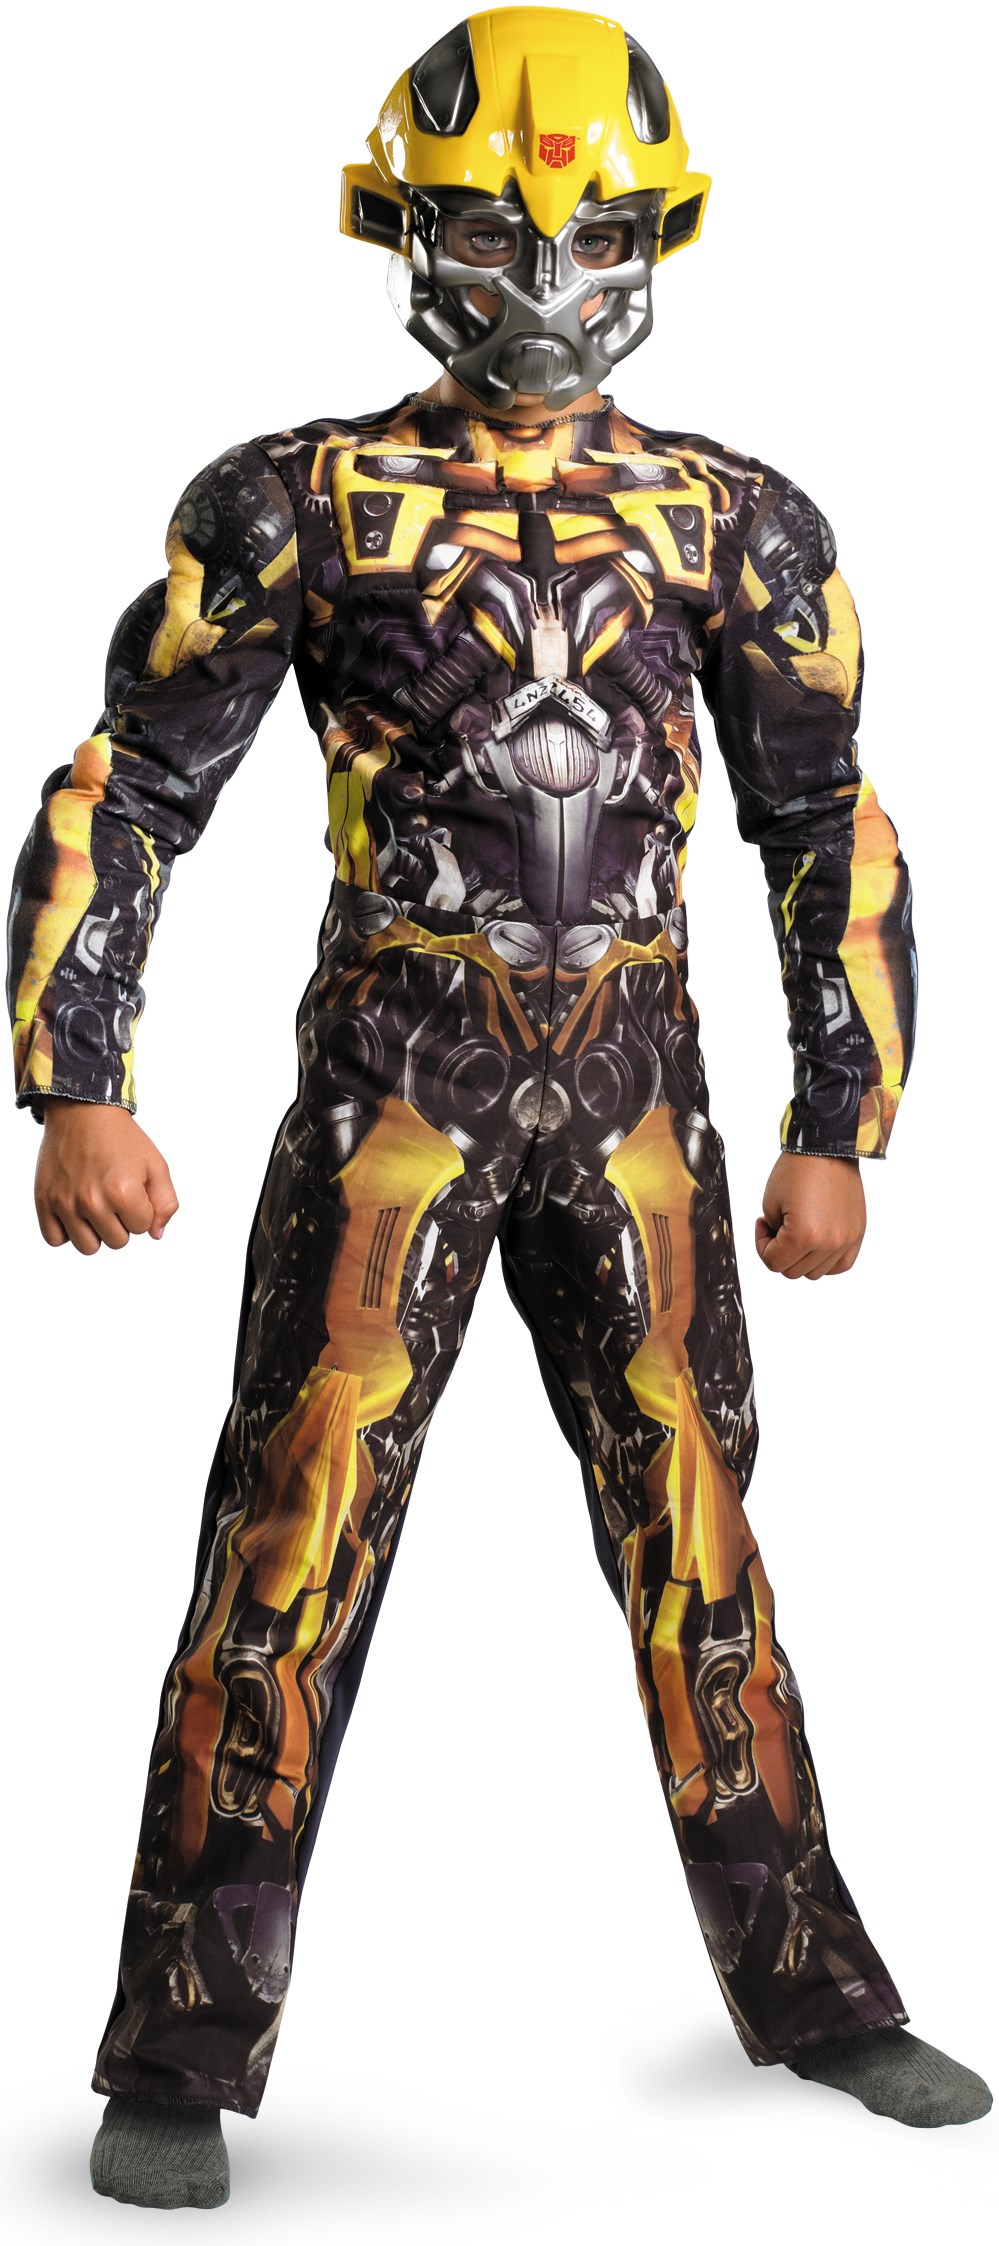 Transformers 3 Dark of the Moon Movie - Bumblebee Classic Muscle Child Costume